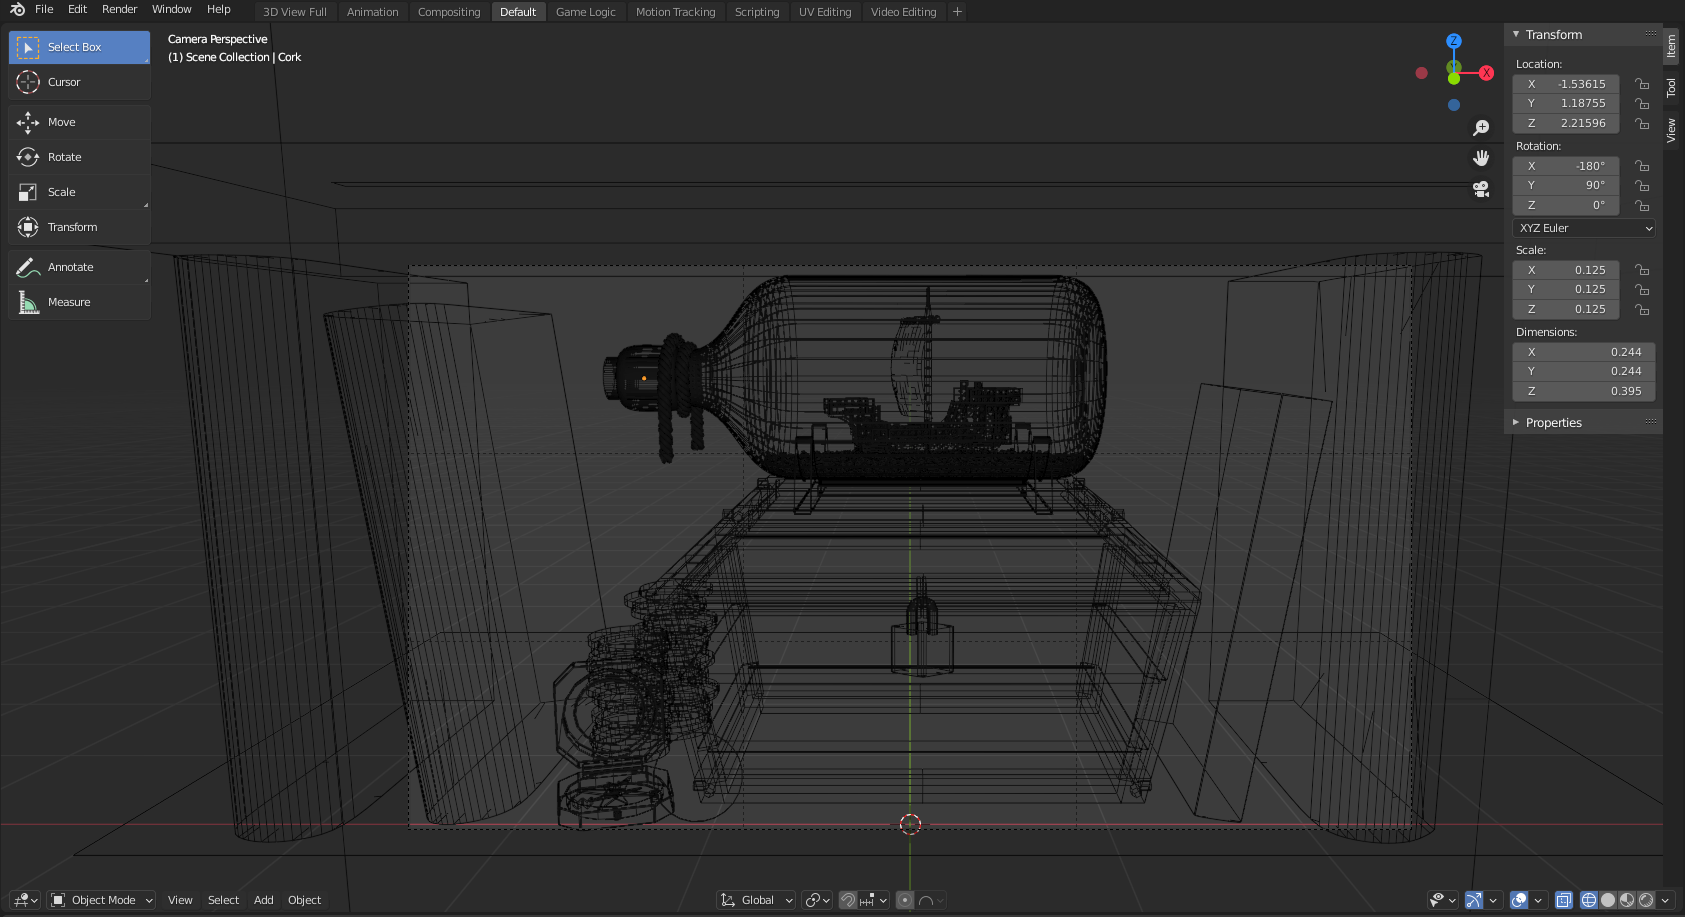 Wireframe view of our scene in Blender